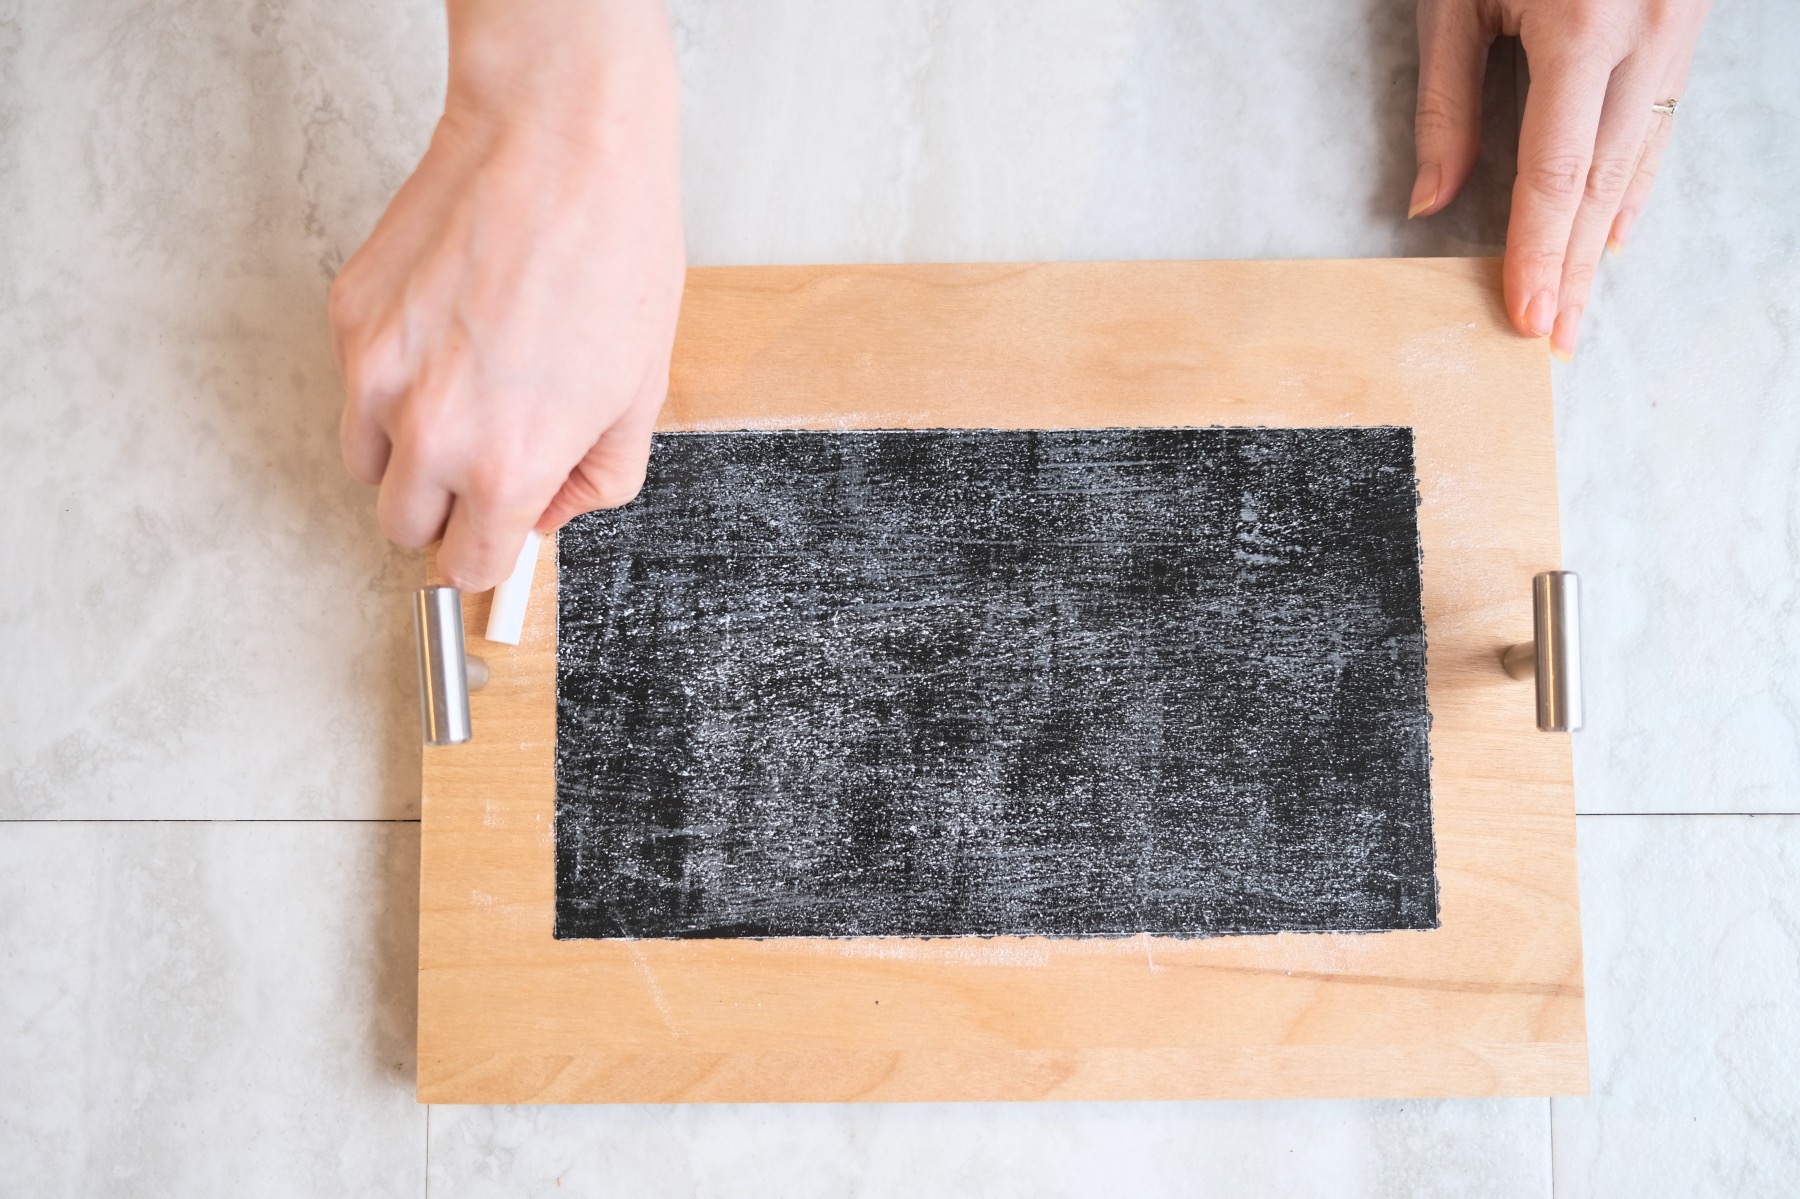 seasoning a chalkboard step by step instructions